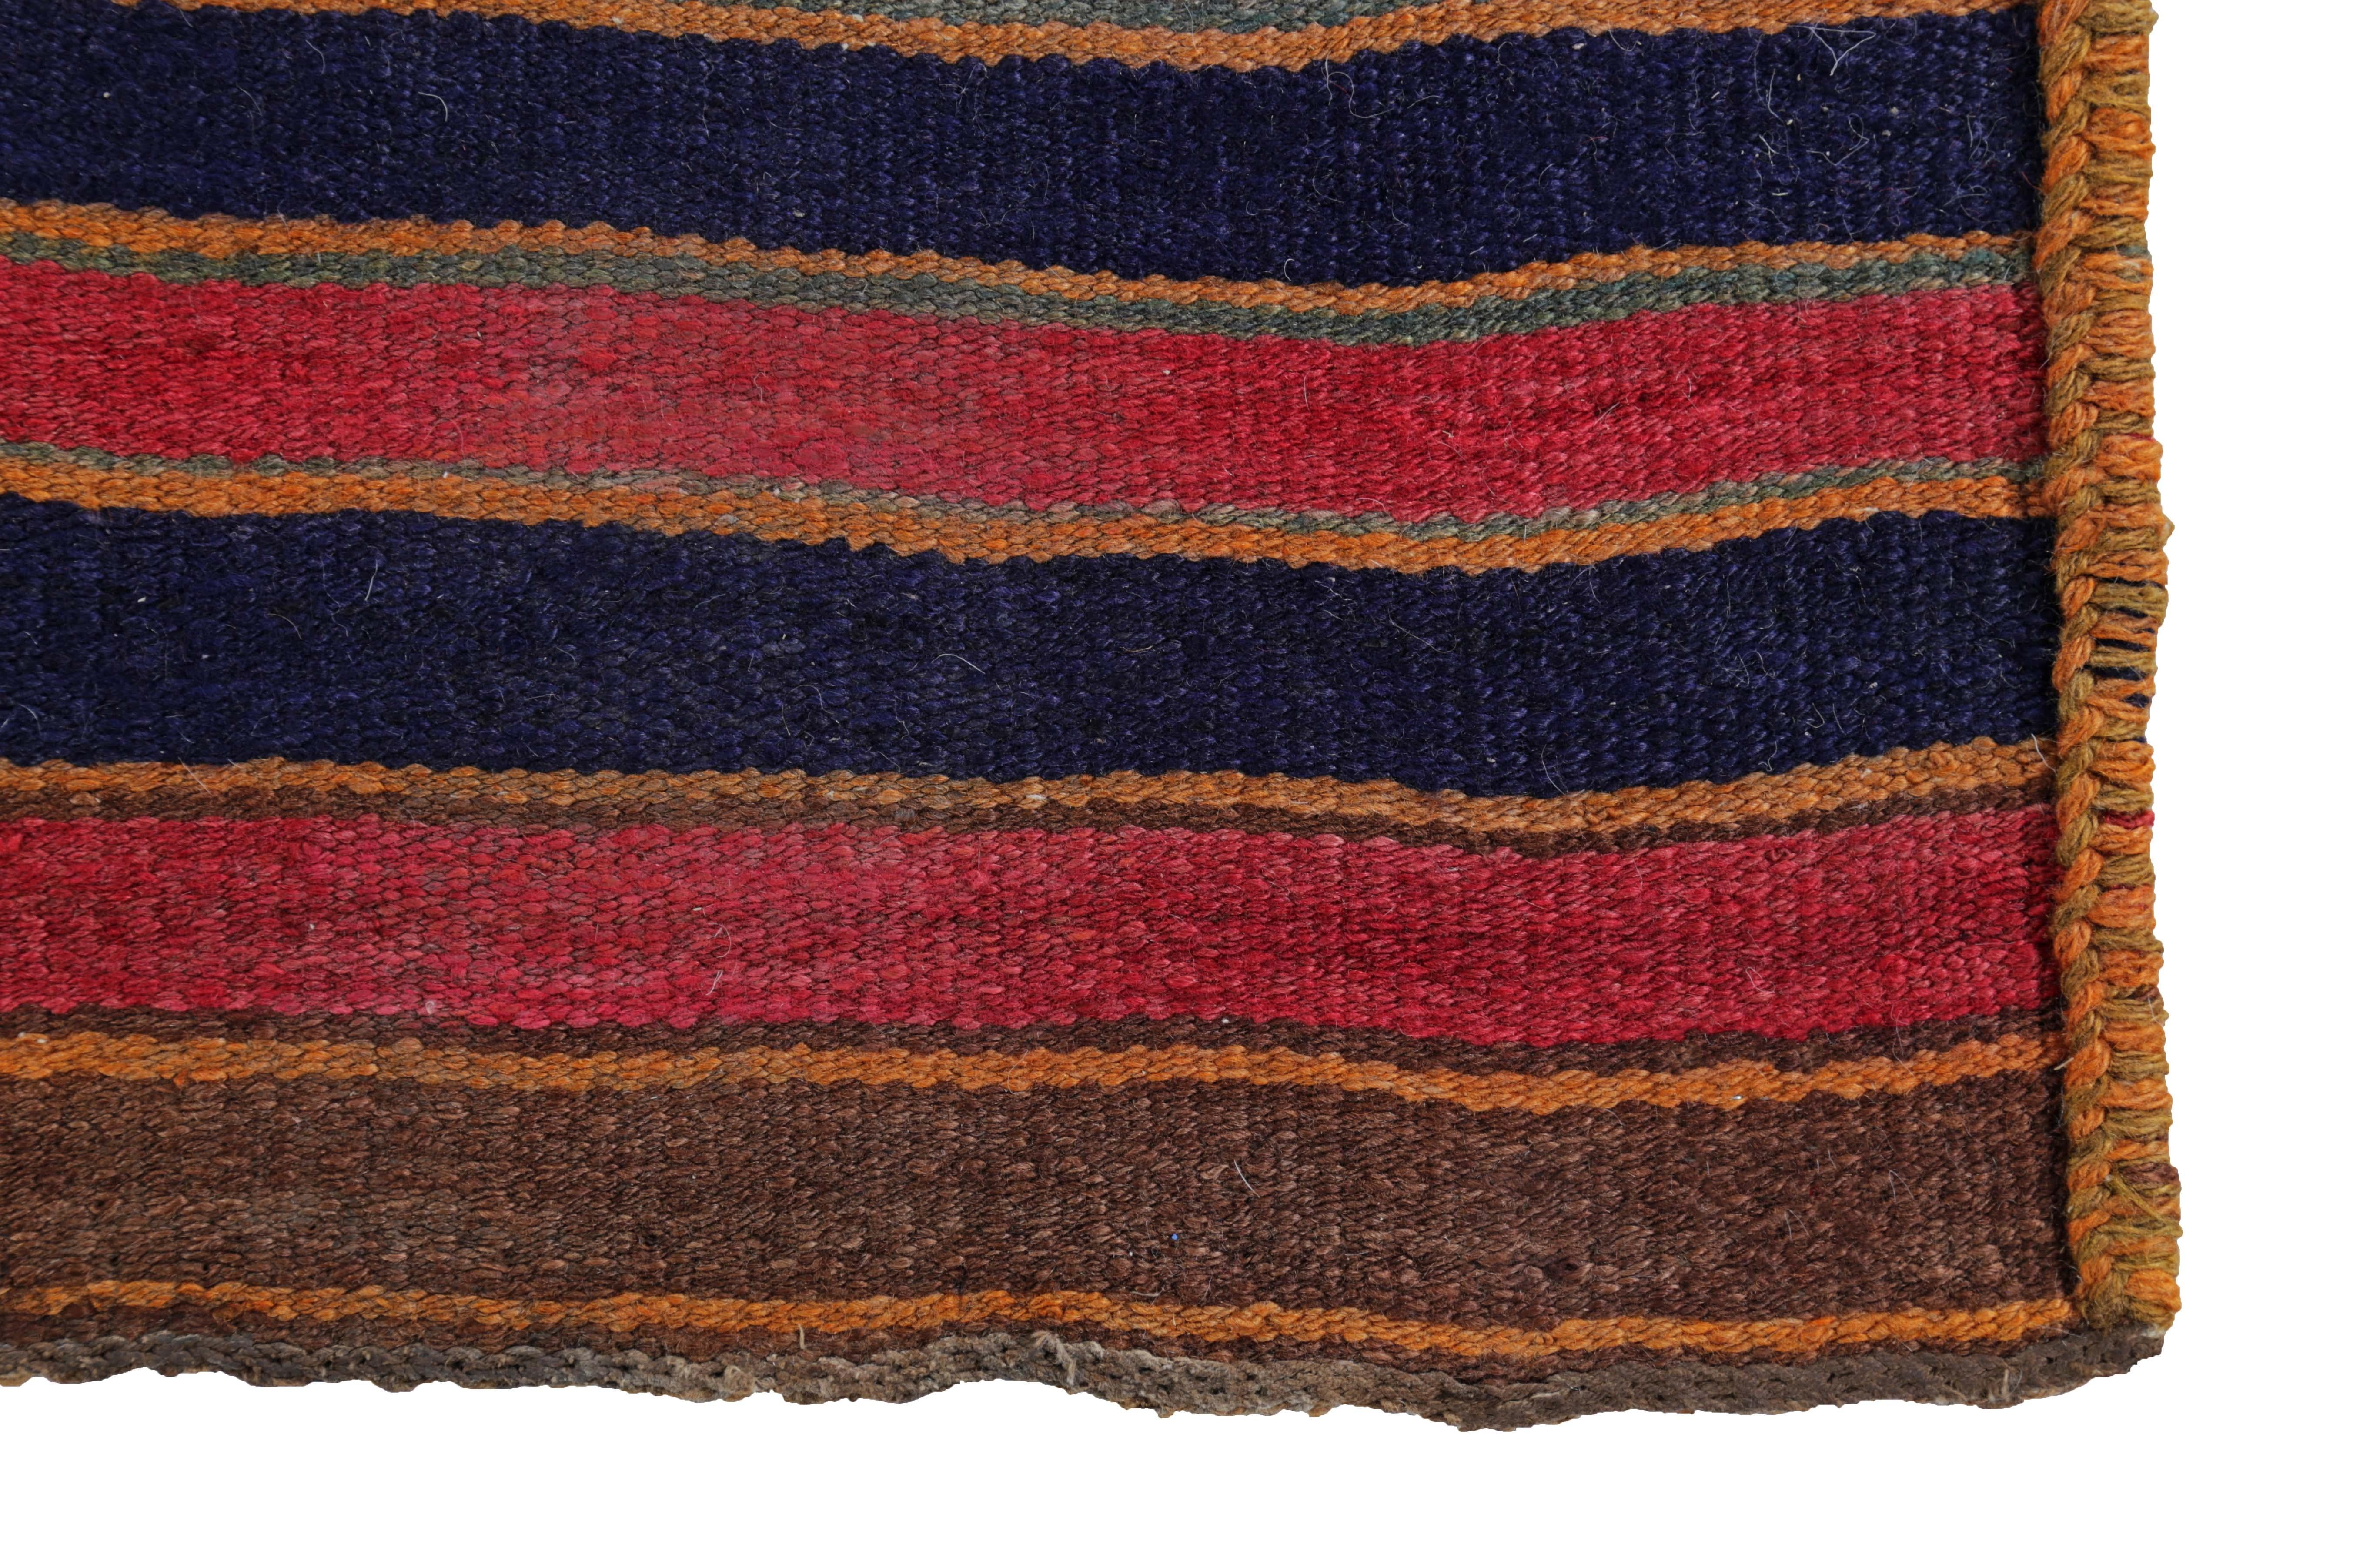 Hand-Woven Modern Turkish Kilim Runner Rug with Red and Blue Stripes on a Brown Field For Sale